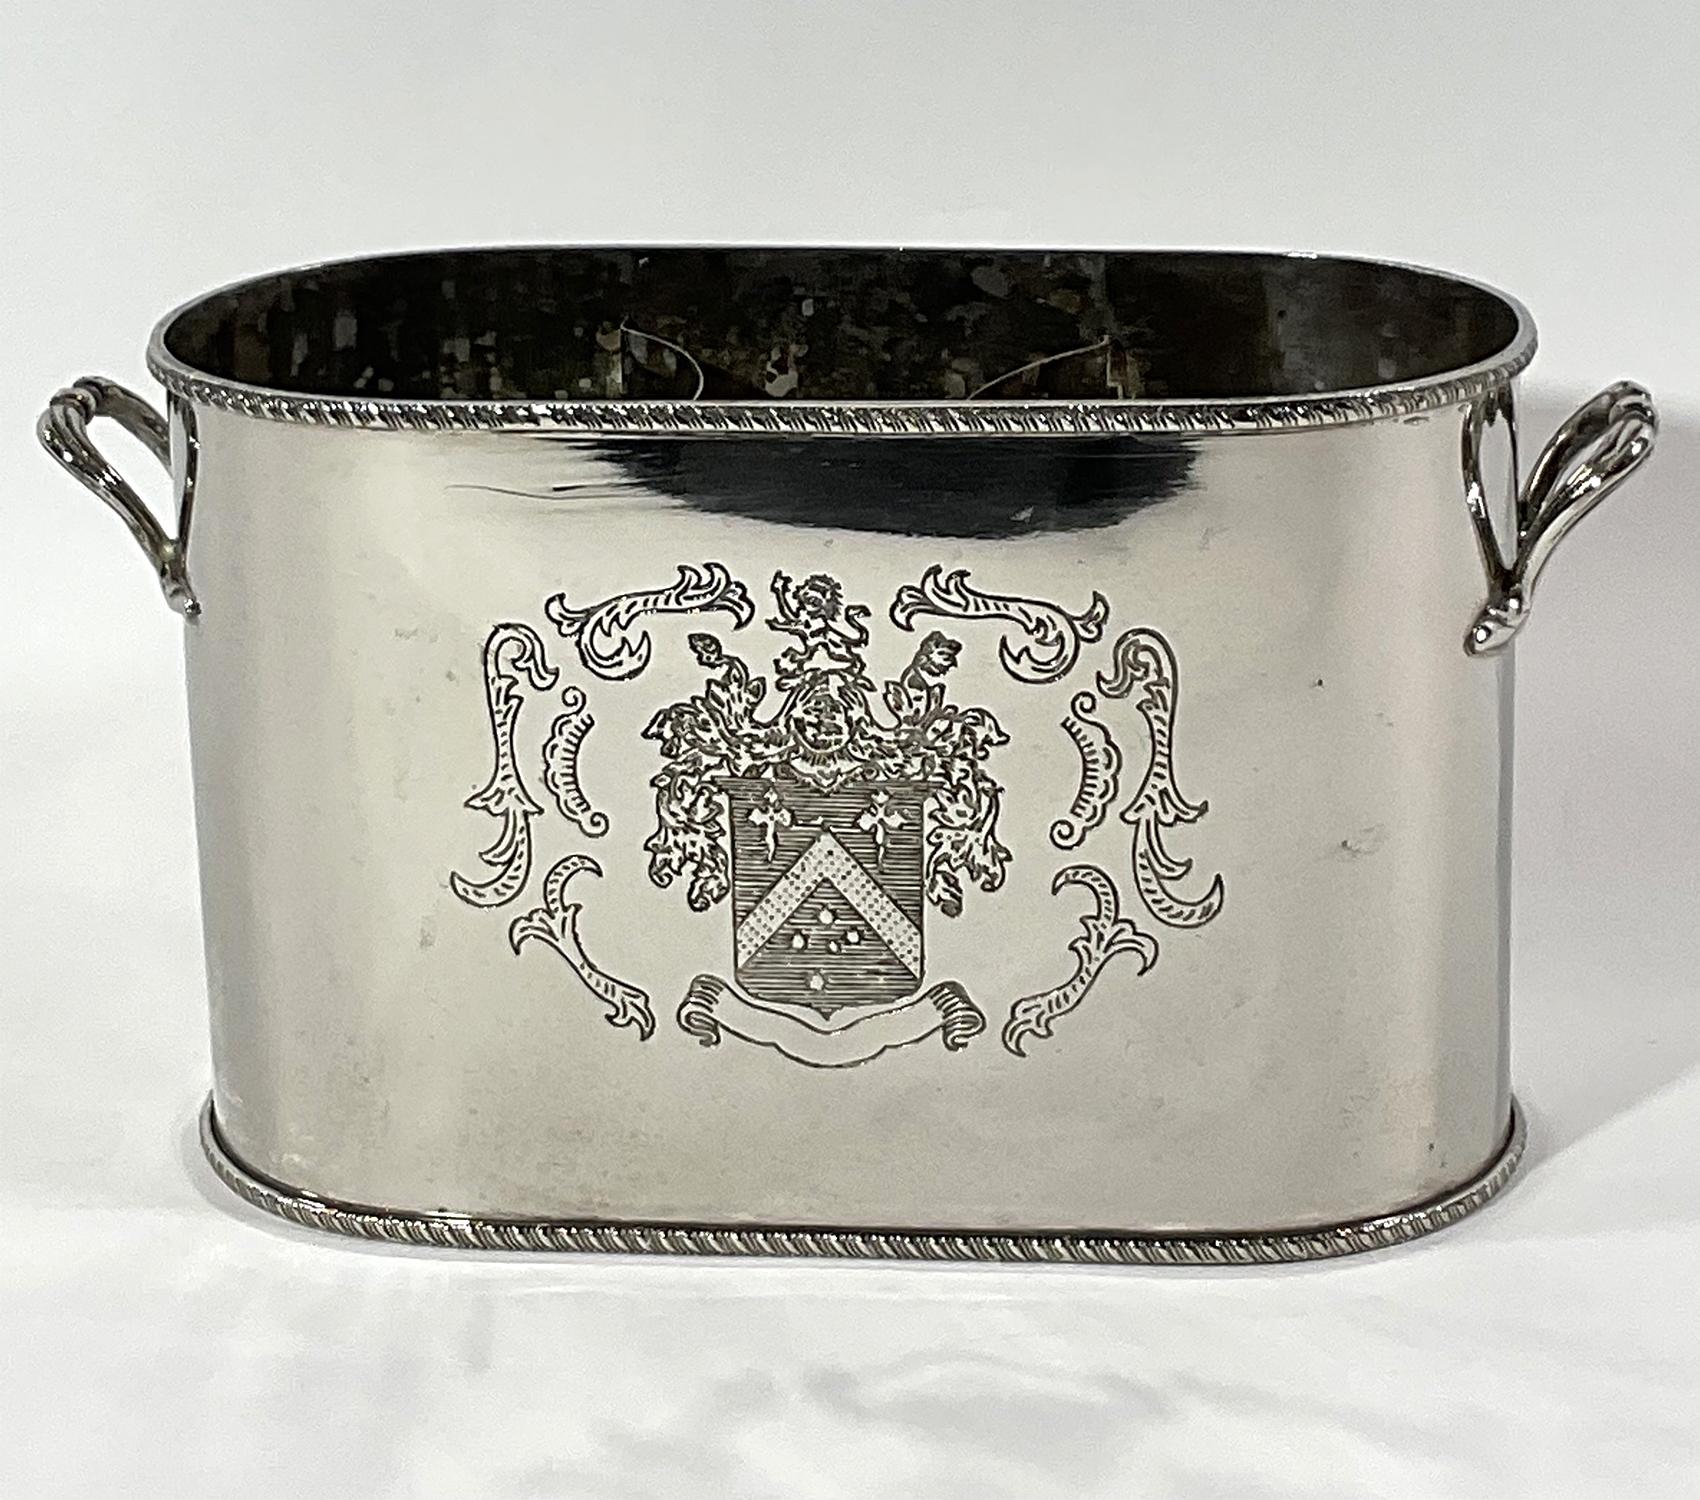 Wine cooler with engraved coats of arms with lion and shield. Two spaces for bottles and ice bin in center. Classis piece of barware. English. Circa 1940.